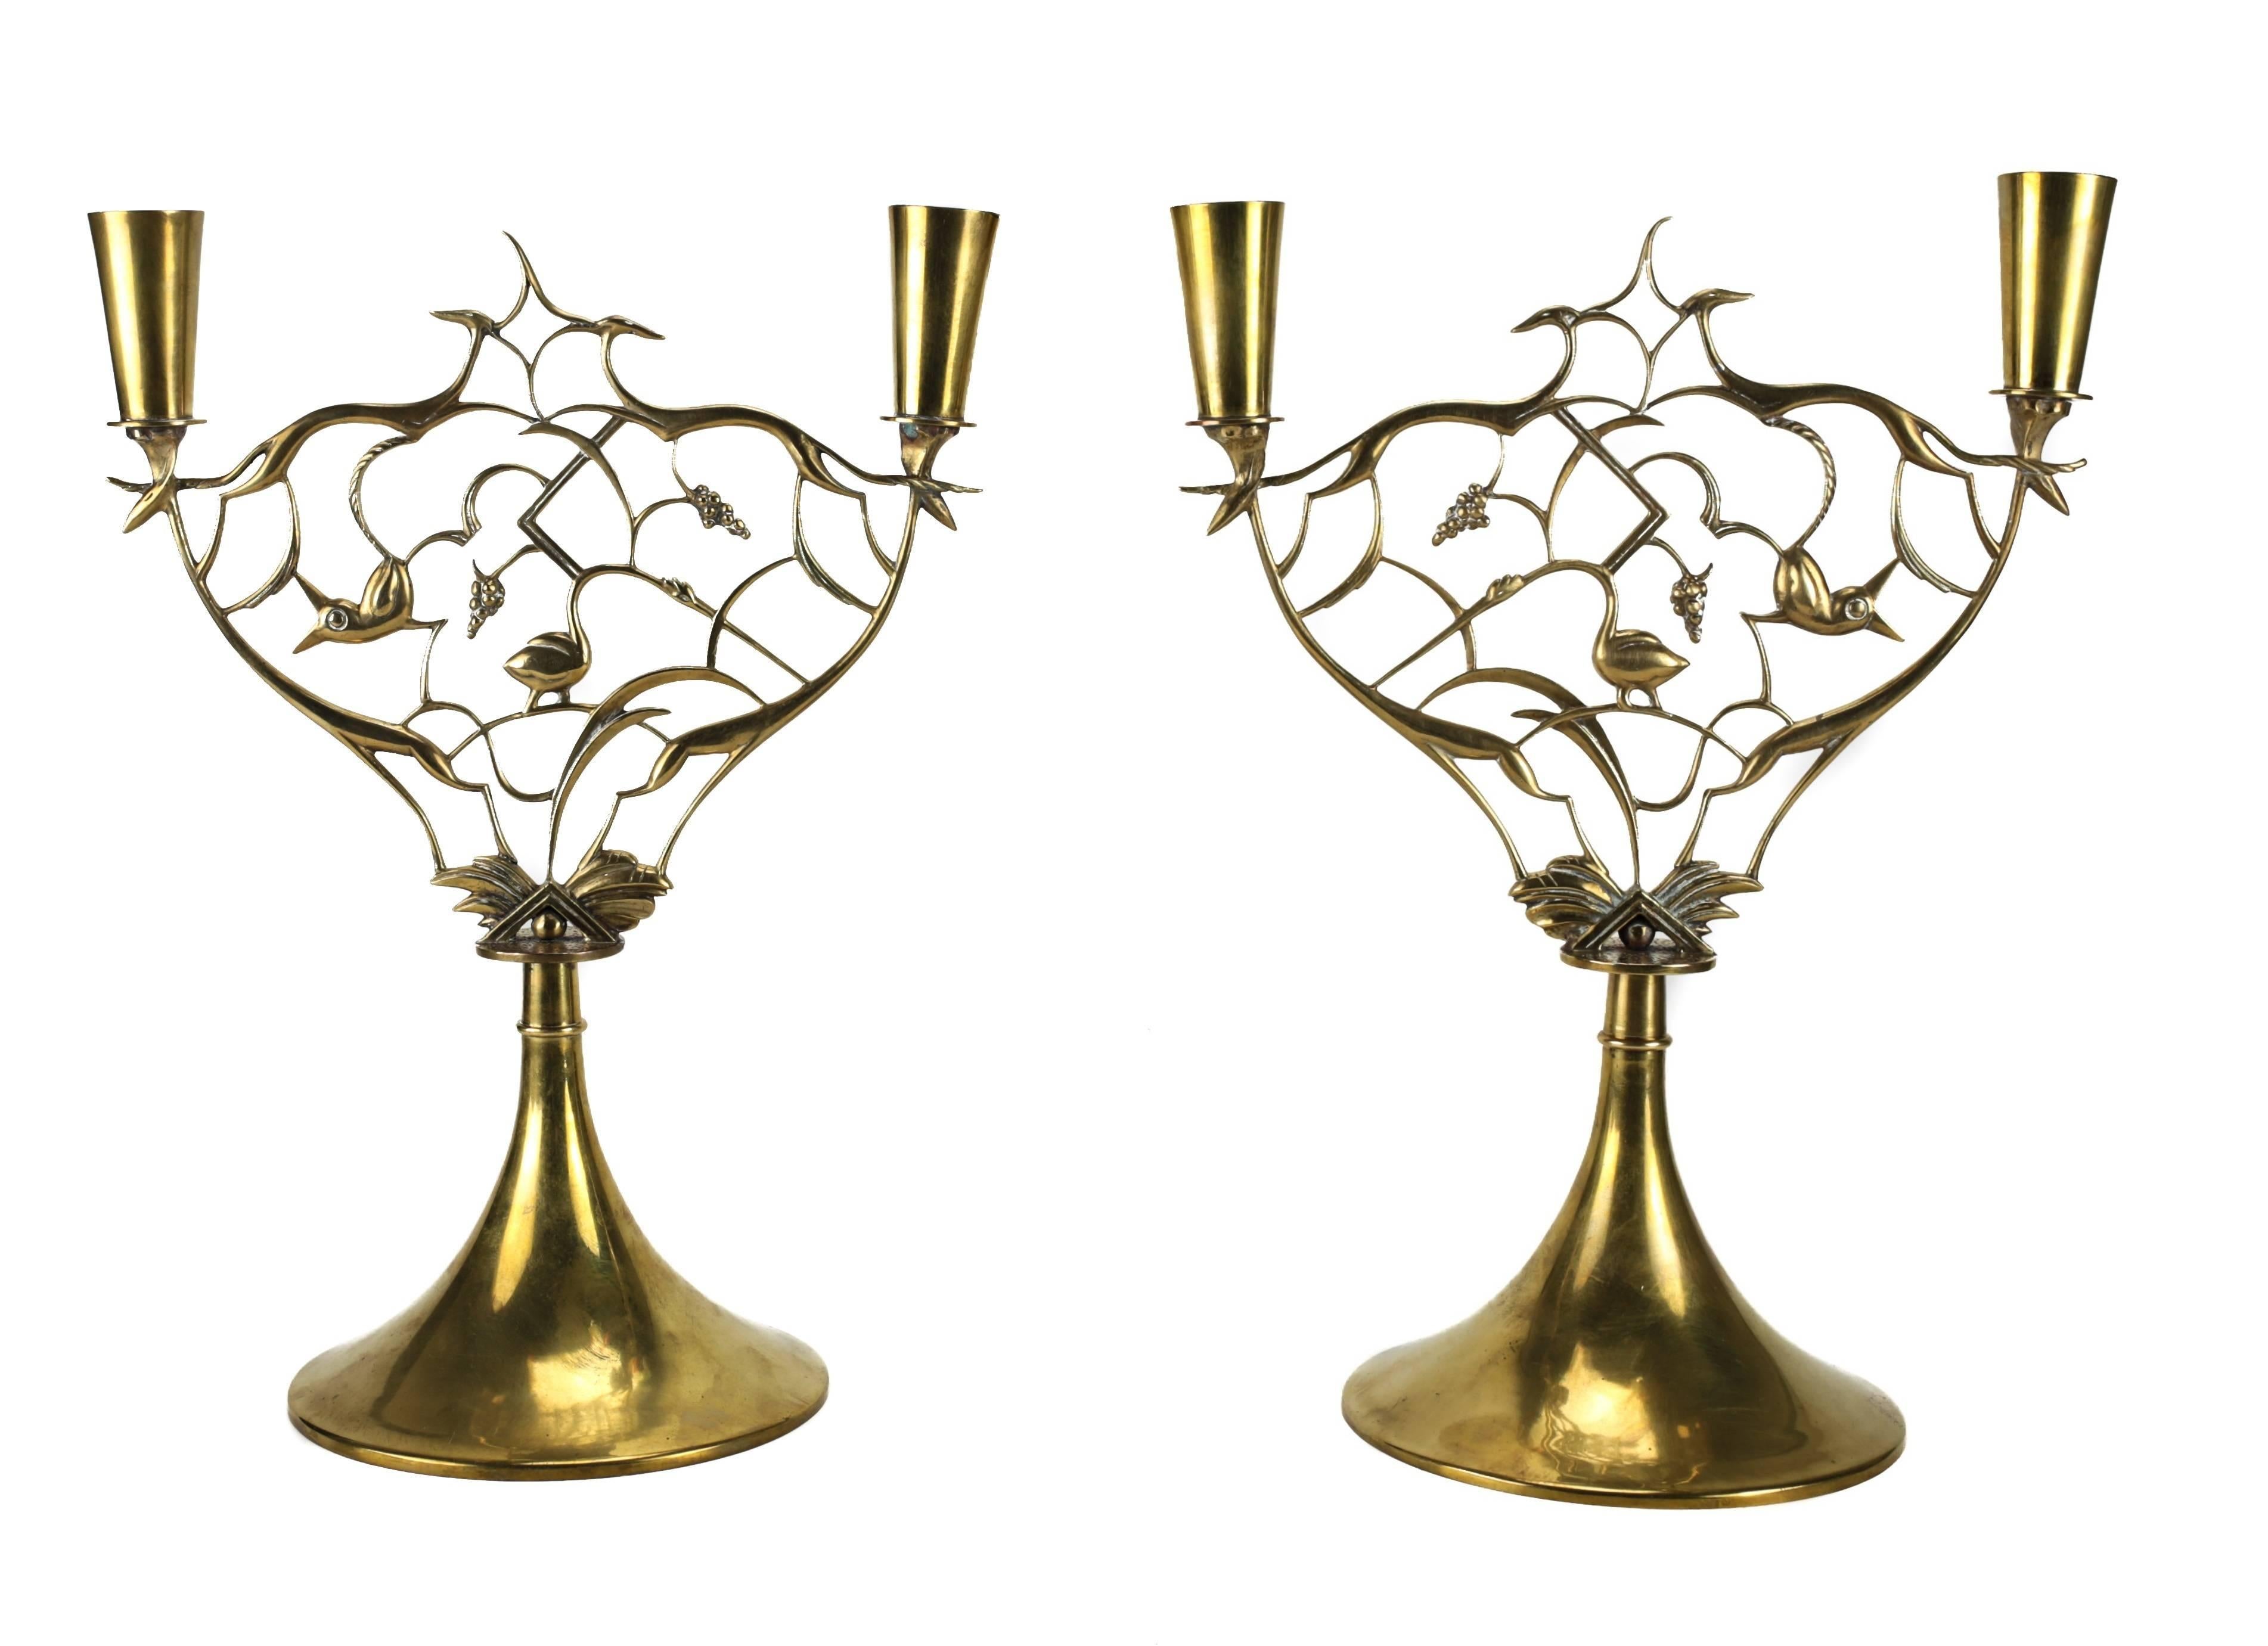 A stunning pair of brass candlesticks with intricate animal integrated vines and grape vine clusters by Karl Hagenauer and produced by Werkstatte Hagenauer. Each signed WHW in a circle.